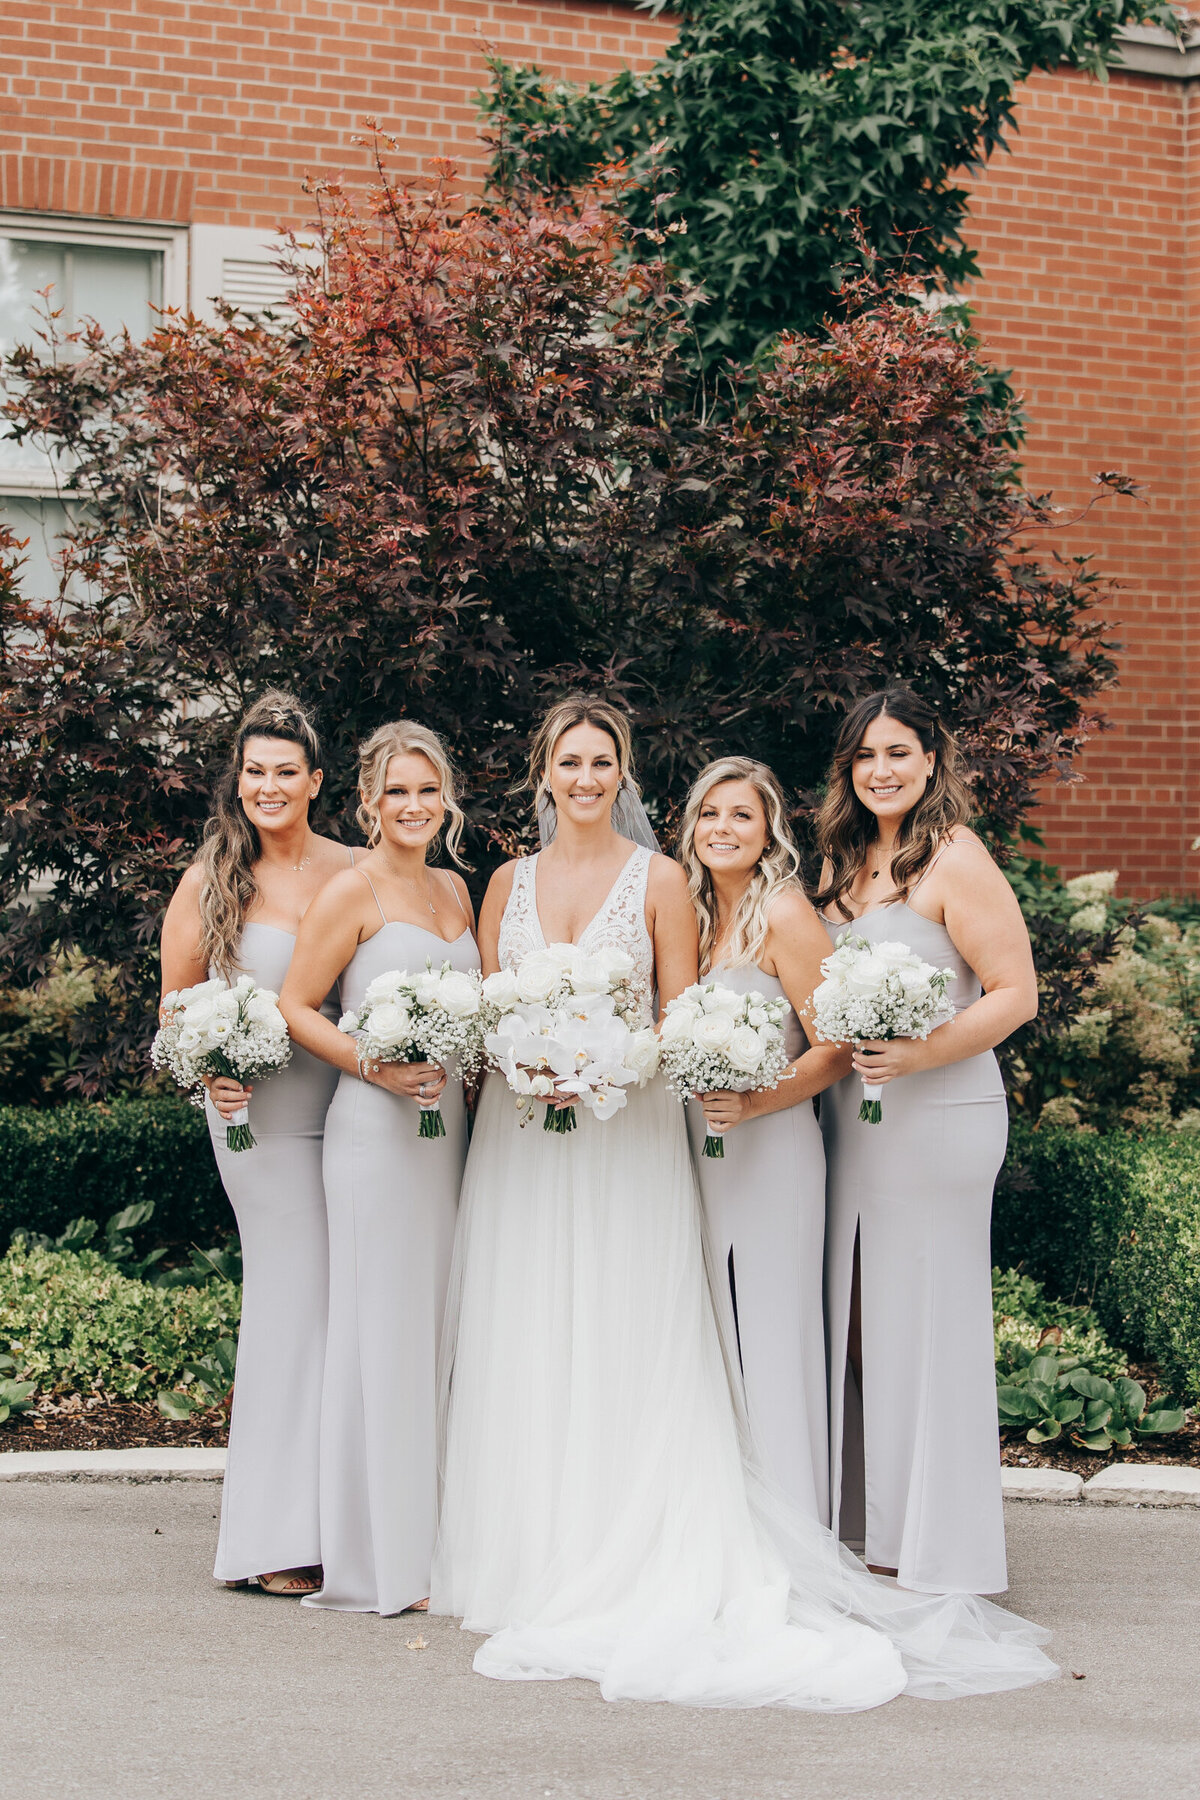 Bridesmaids holding white bouquets posing for traditional photos